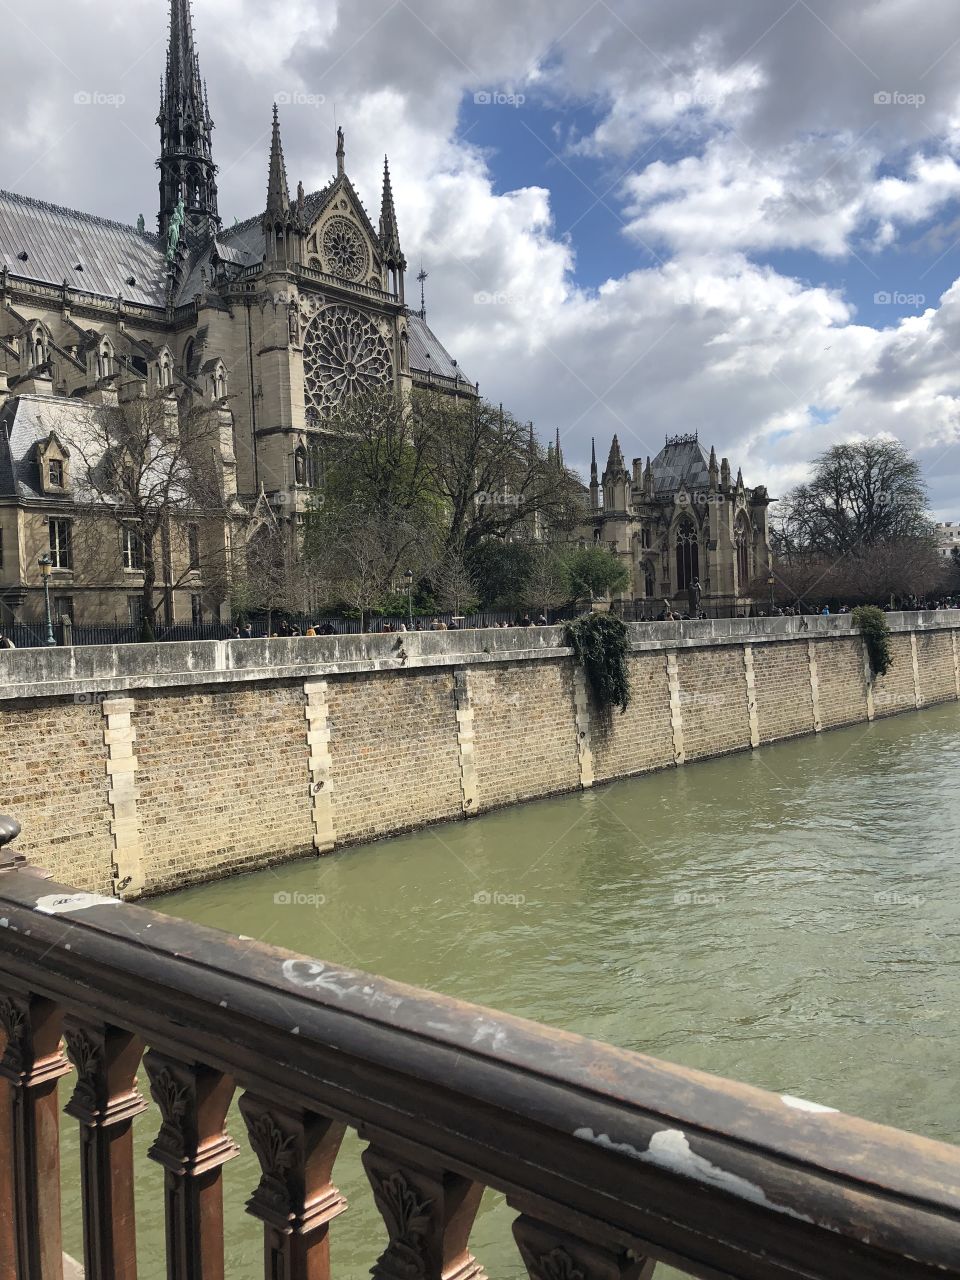 A view of the Seine River and the back of the Notre Dame Cathedral in Paris, France. 